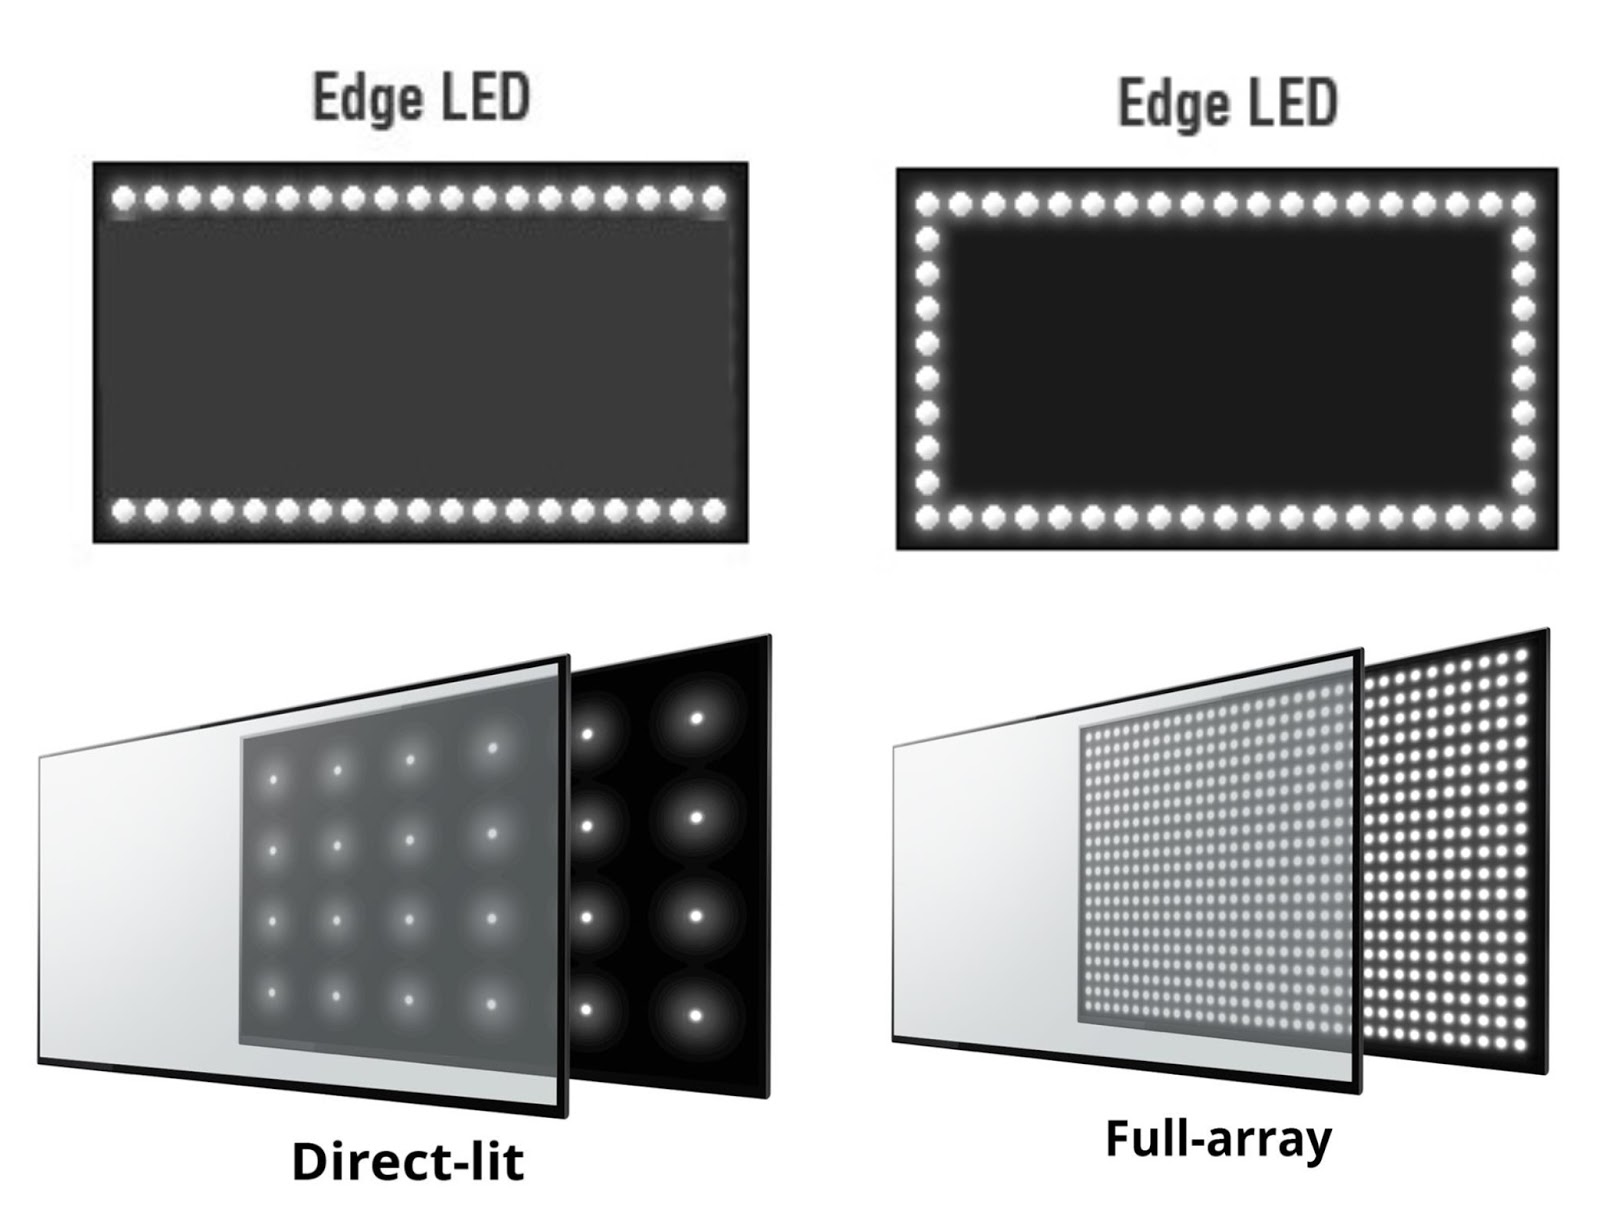 Different alignments of LEDs